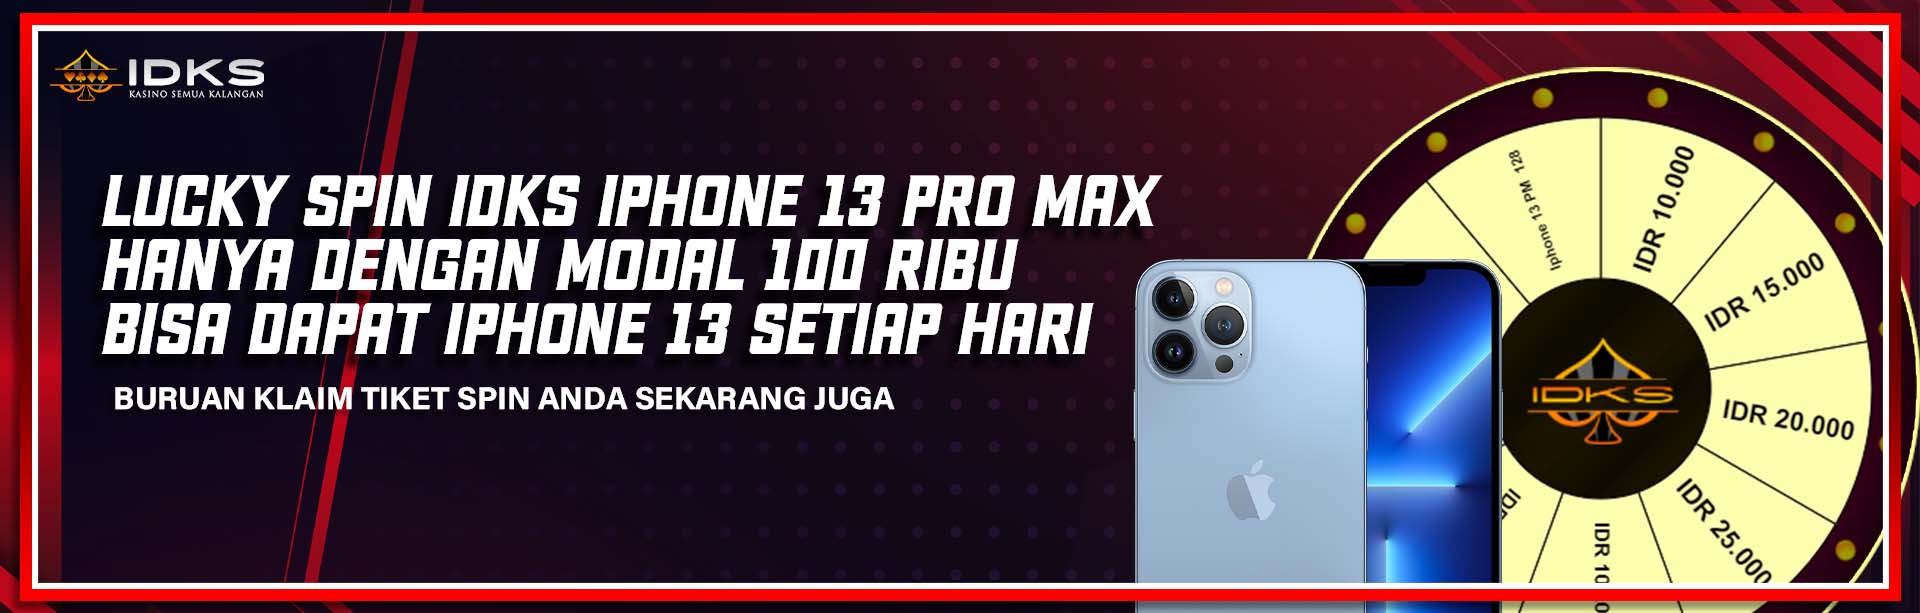 EVENT LUCKY SPIN IDKS IPHONE 13 PRO MAX | INFO IDKS